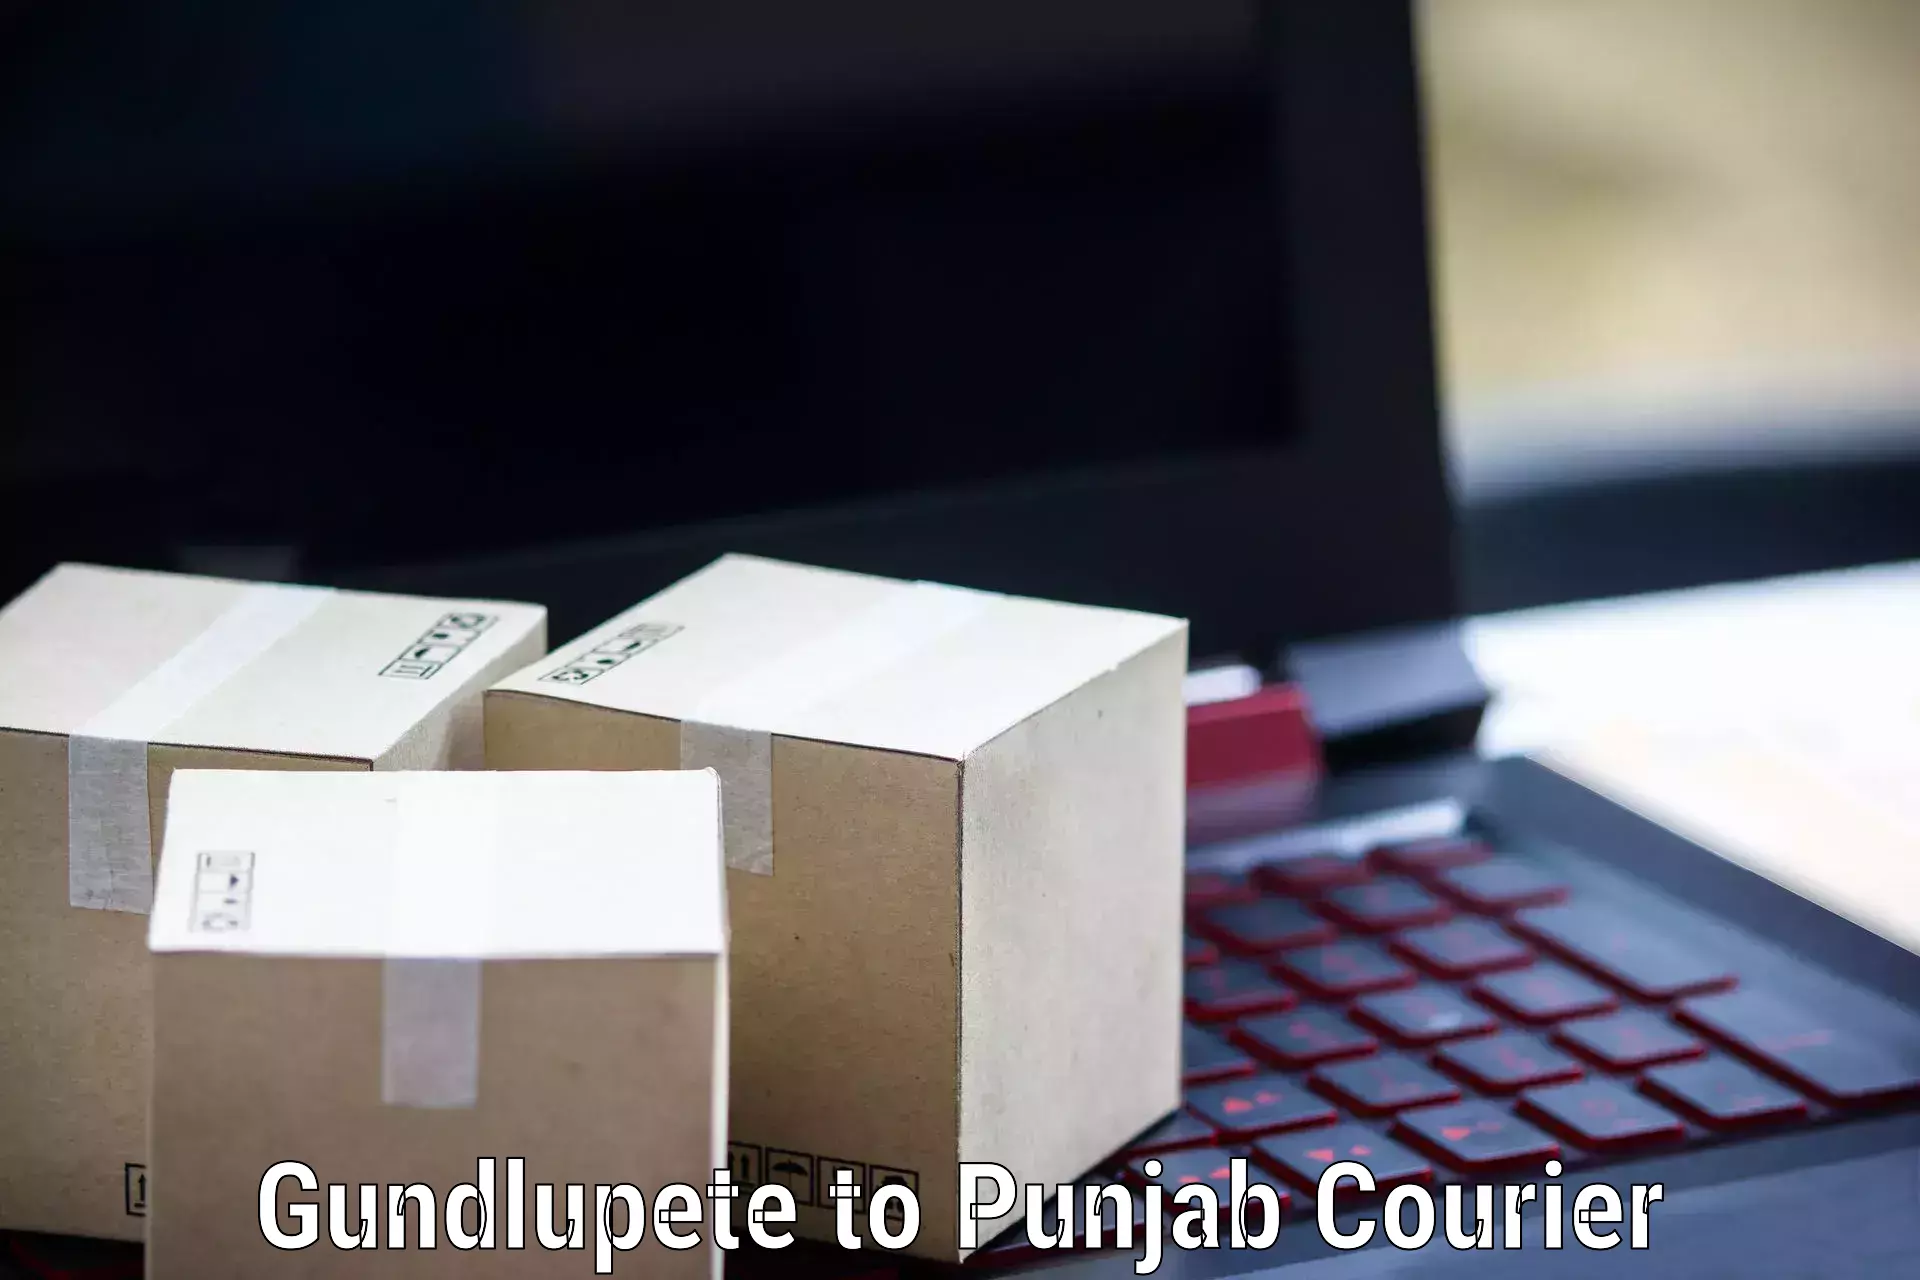 Business delivery service Gundlupete to Punjab